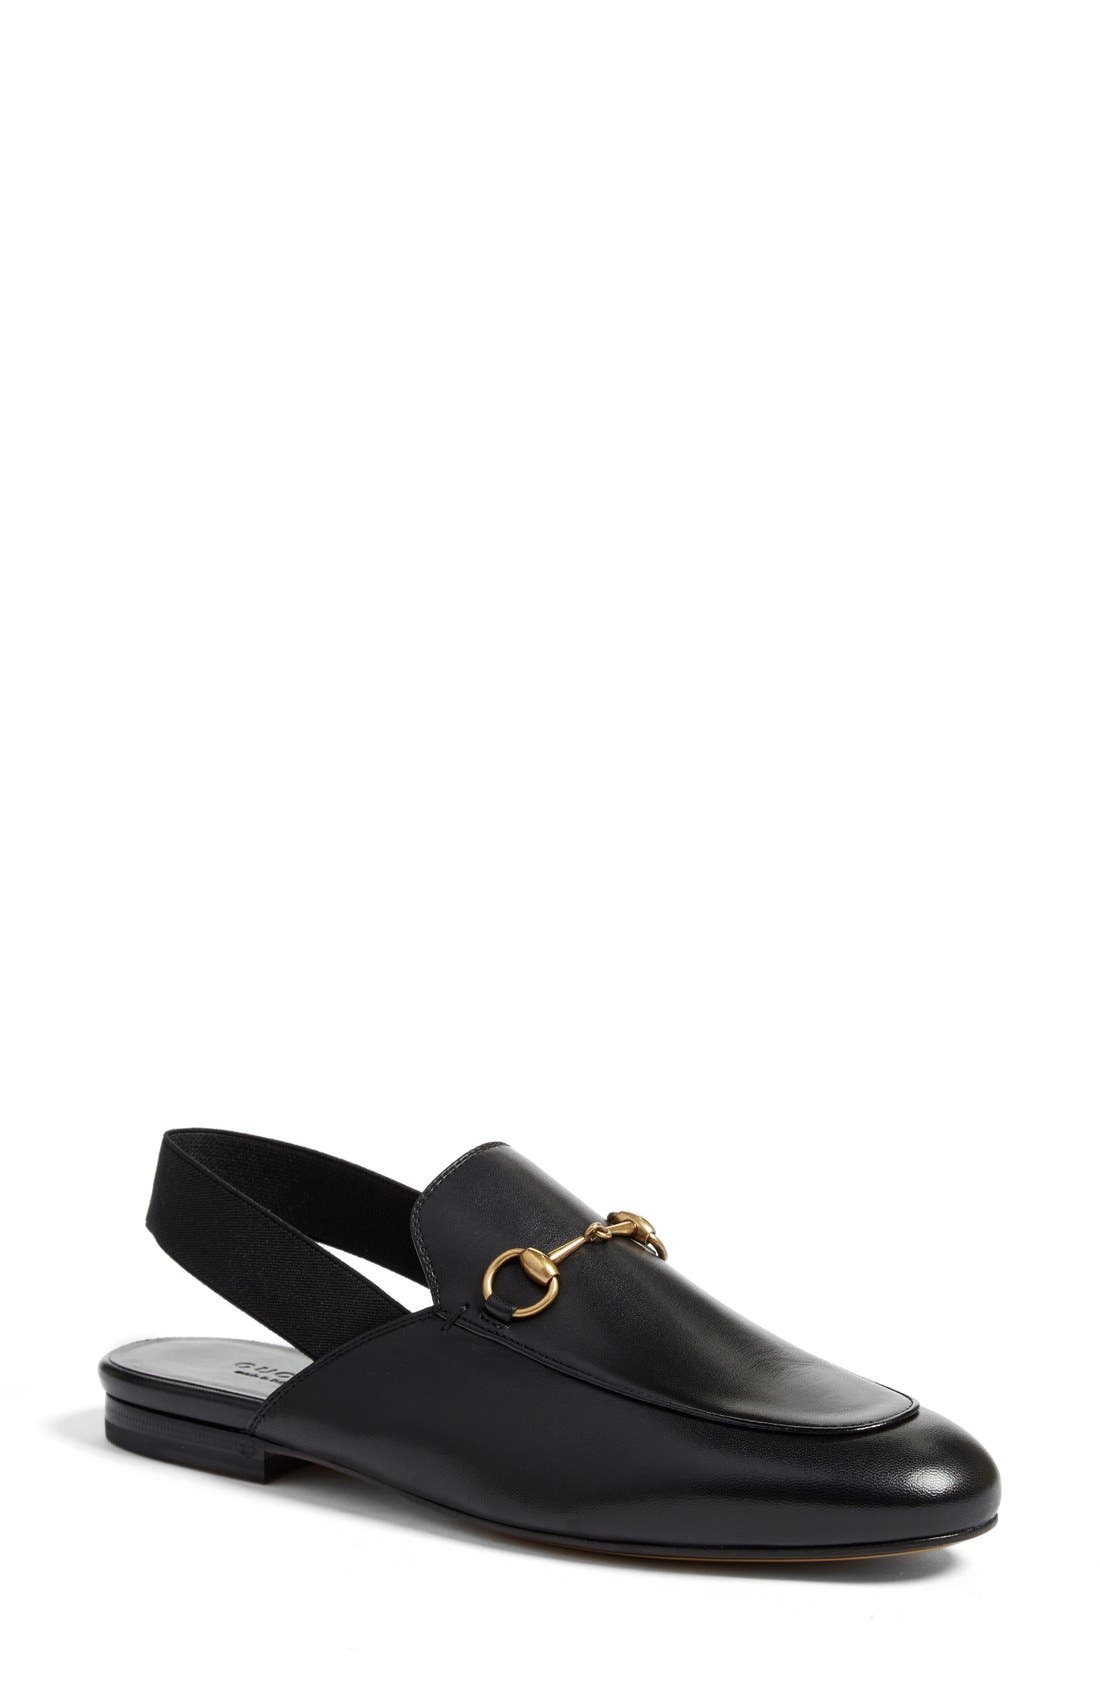 gucci mules nordstrom